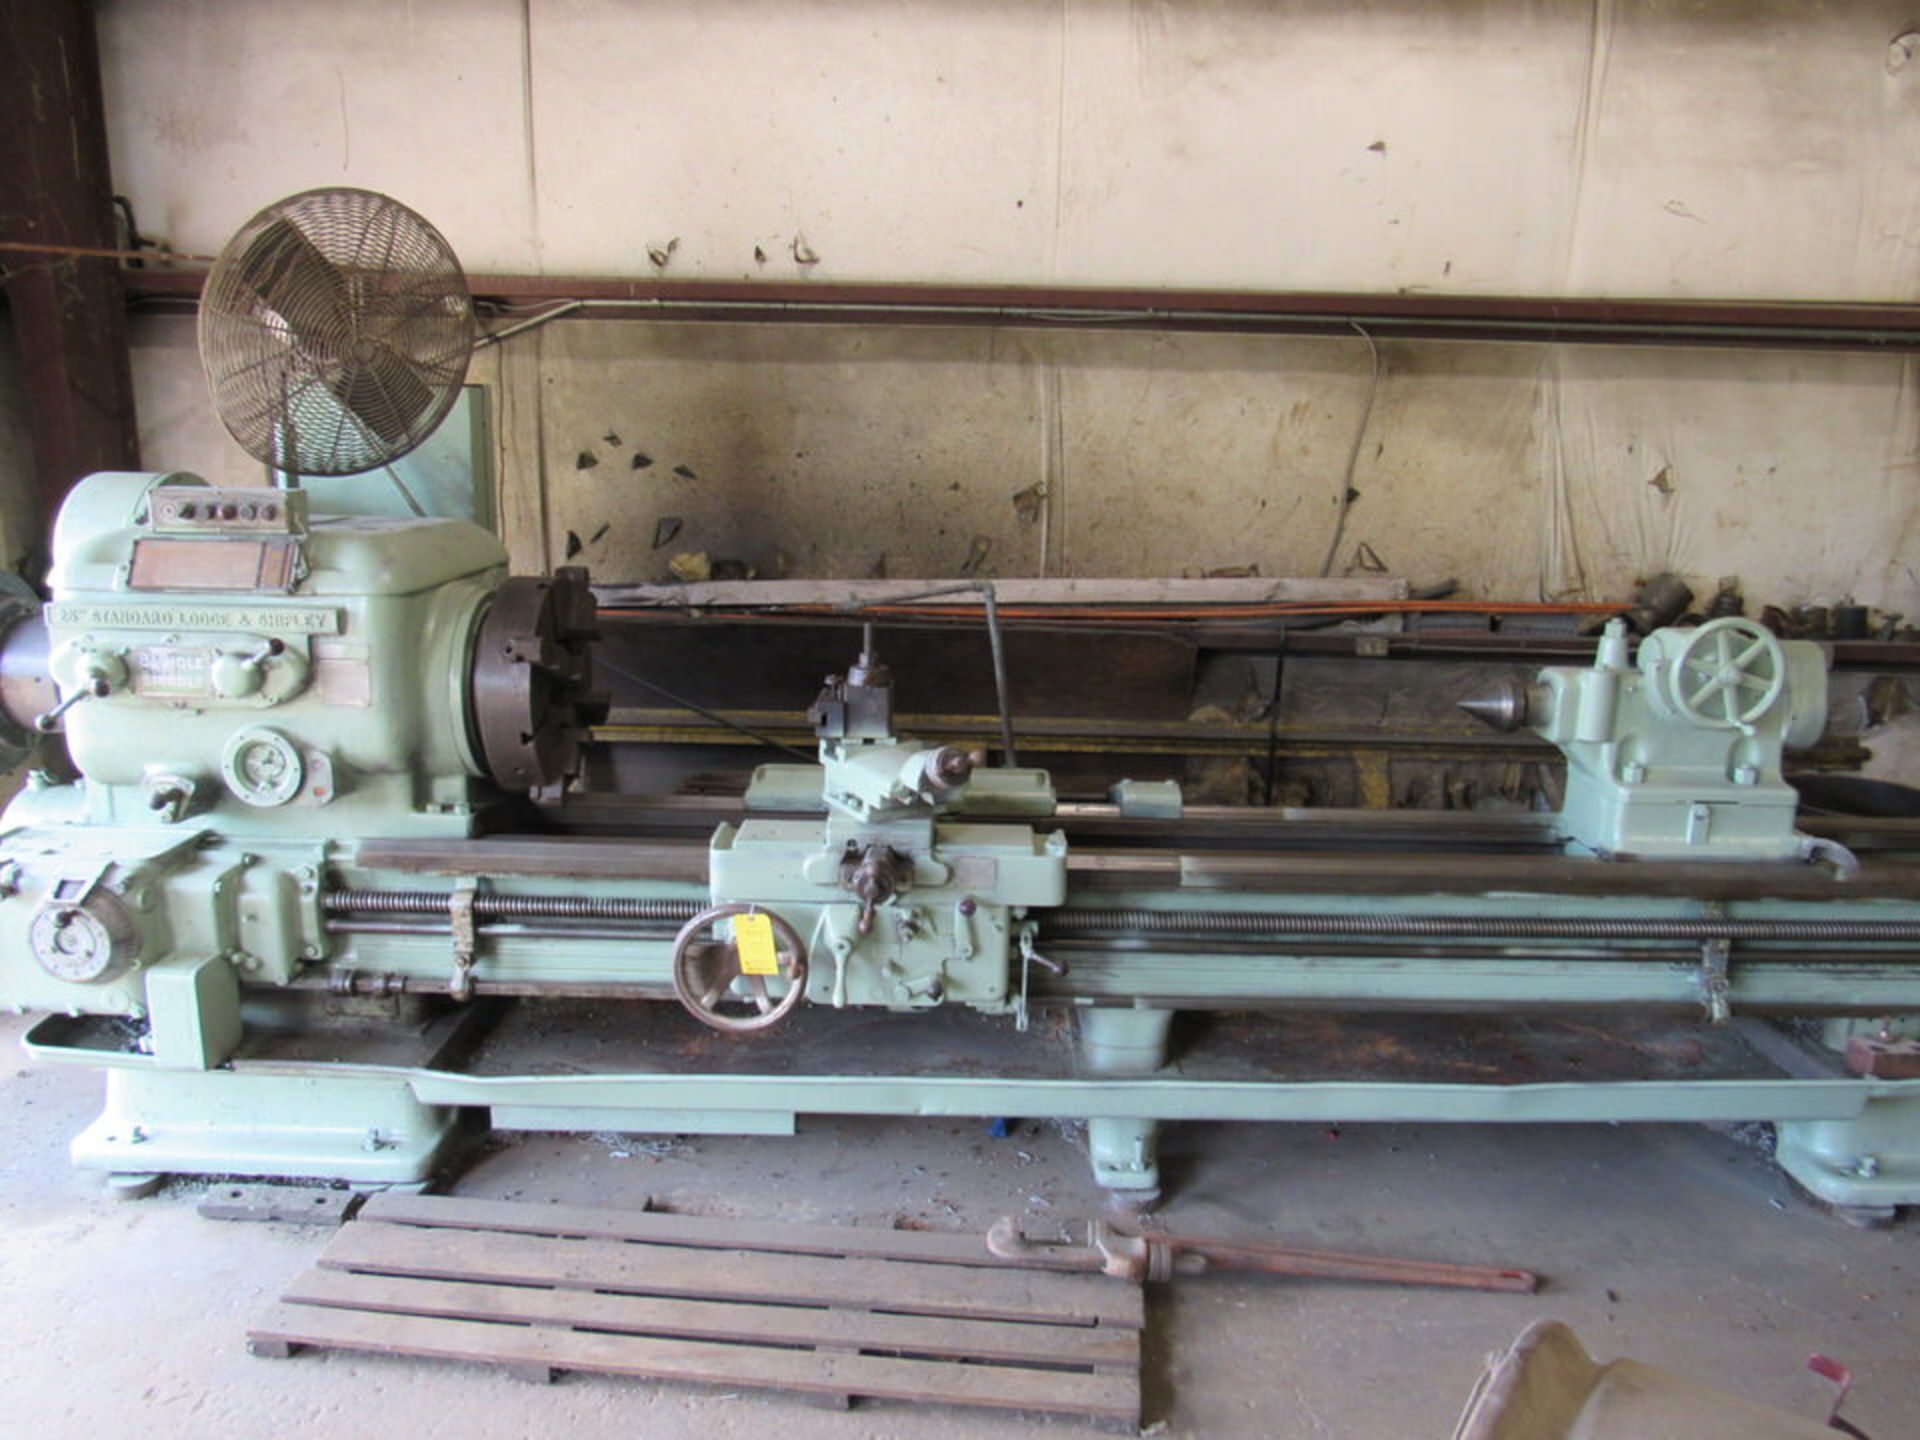 Lodge & Shipley 25" Standard Engine Lathe, 24" swing, 144" bed length, 21" 4-jaw front and rear - Image 2 of 14